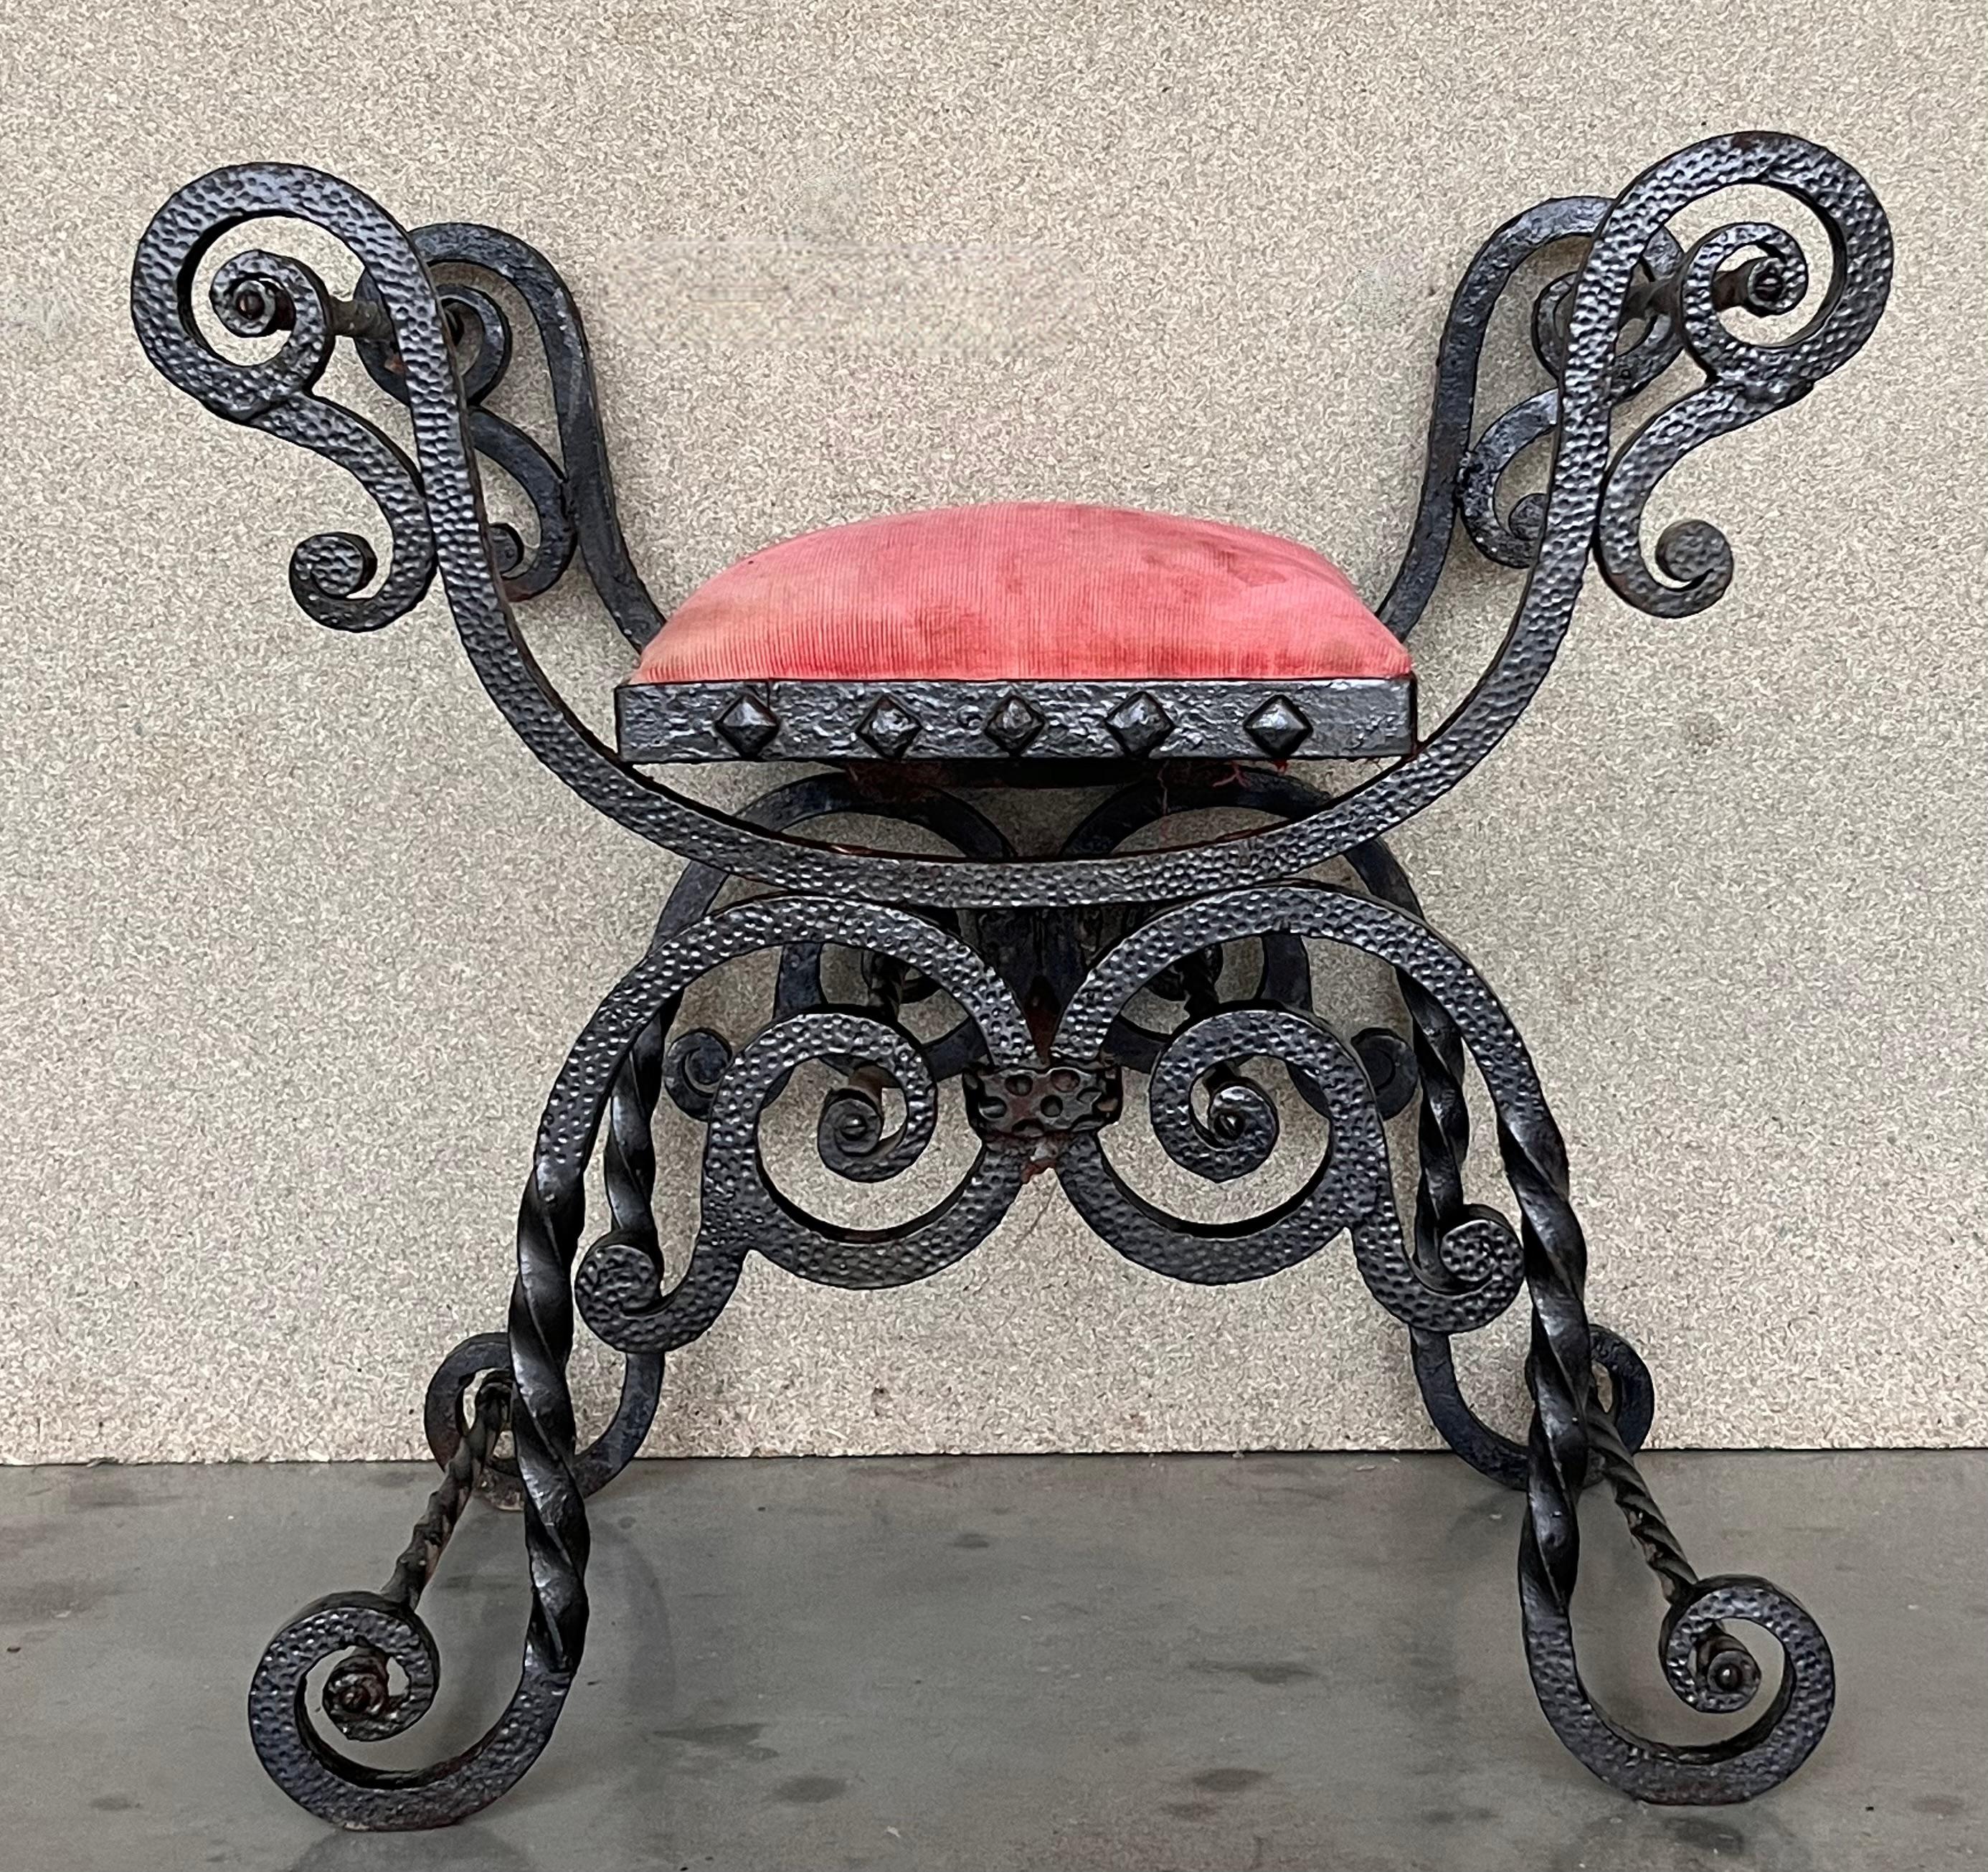 Stylish wrought iron Curule bench made in the neoclassical taste. Featuring an X-form design with scrolled arms and feet. These bench are also known as Dante chairs, Savonarola chairs, and throne benches. The wrought iron has a tough patinated metal